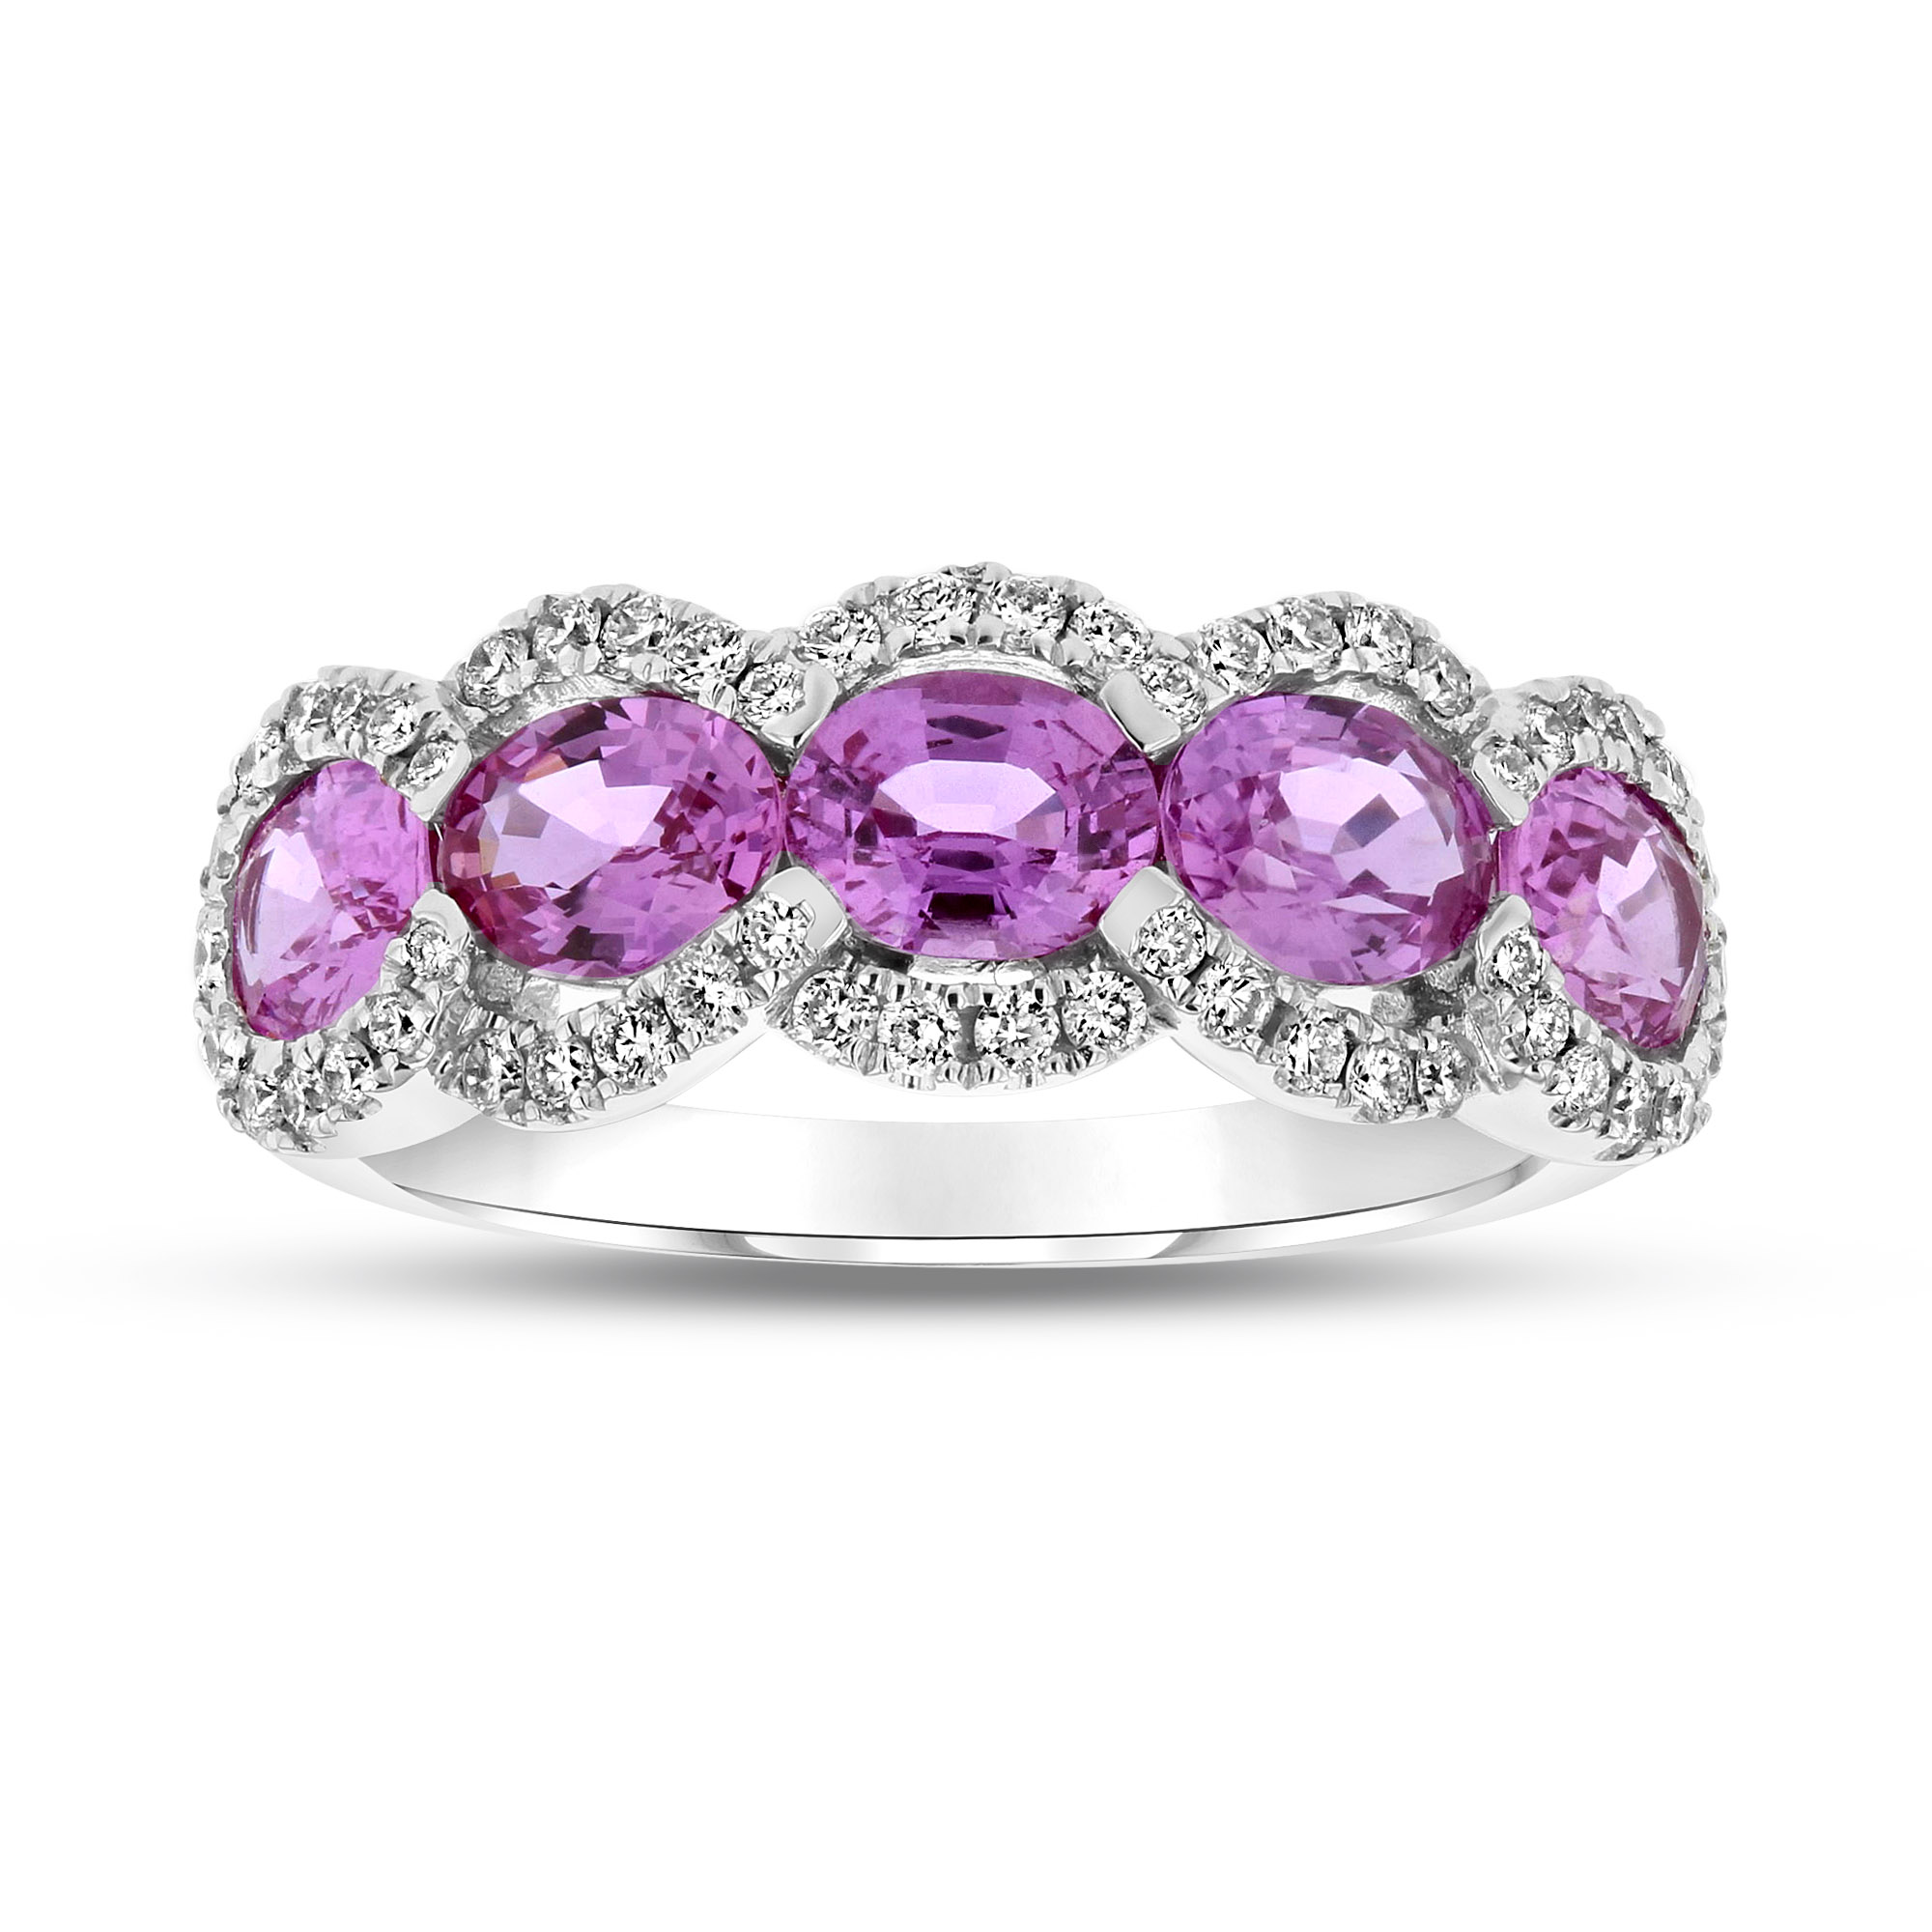 View 2.38ctw Diamond and Pink Sapphire Ring in 18k White Gold